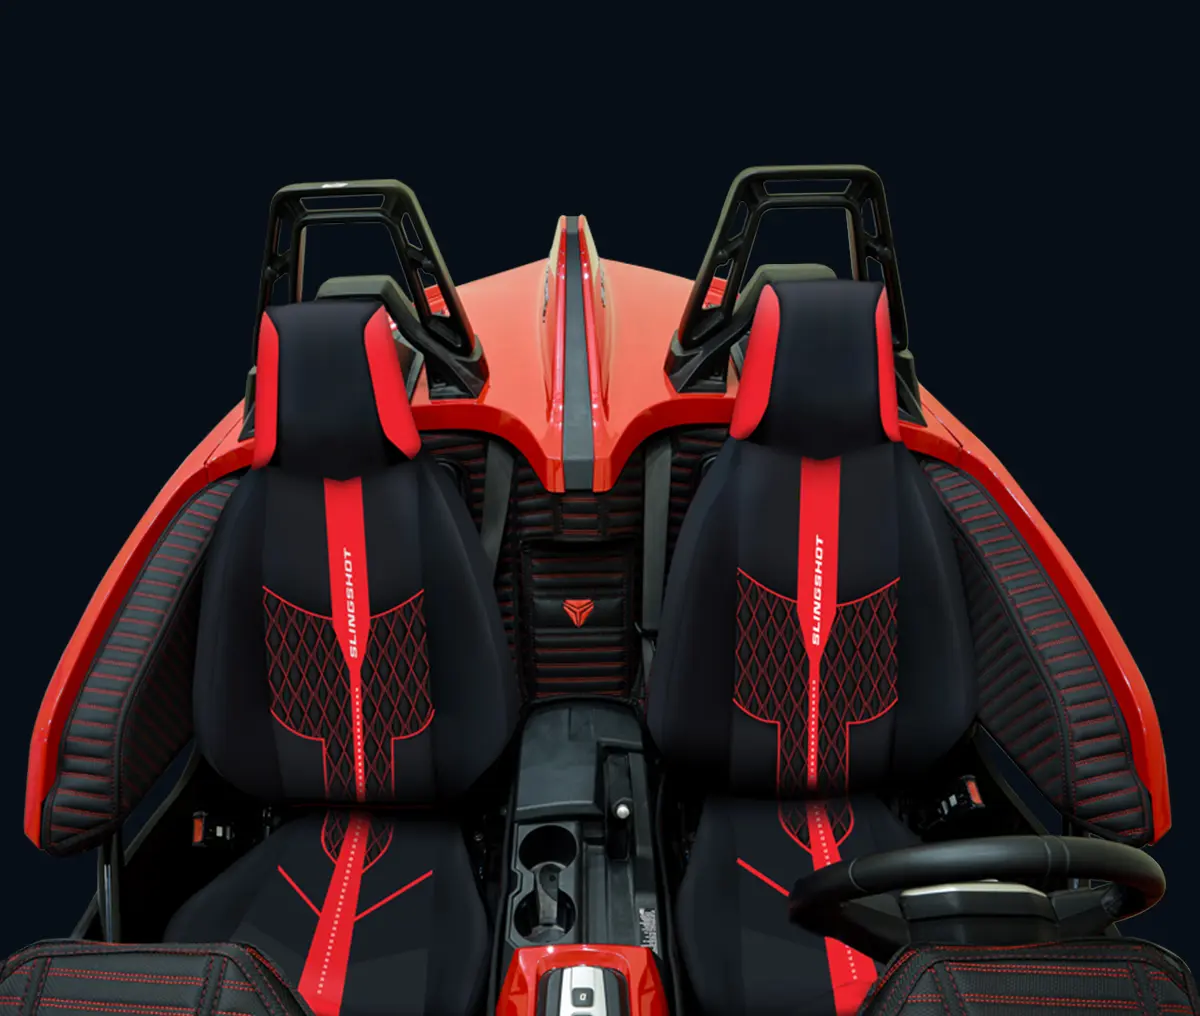 Red Diamond seat covers